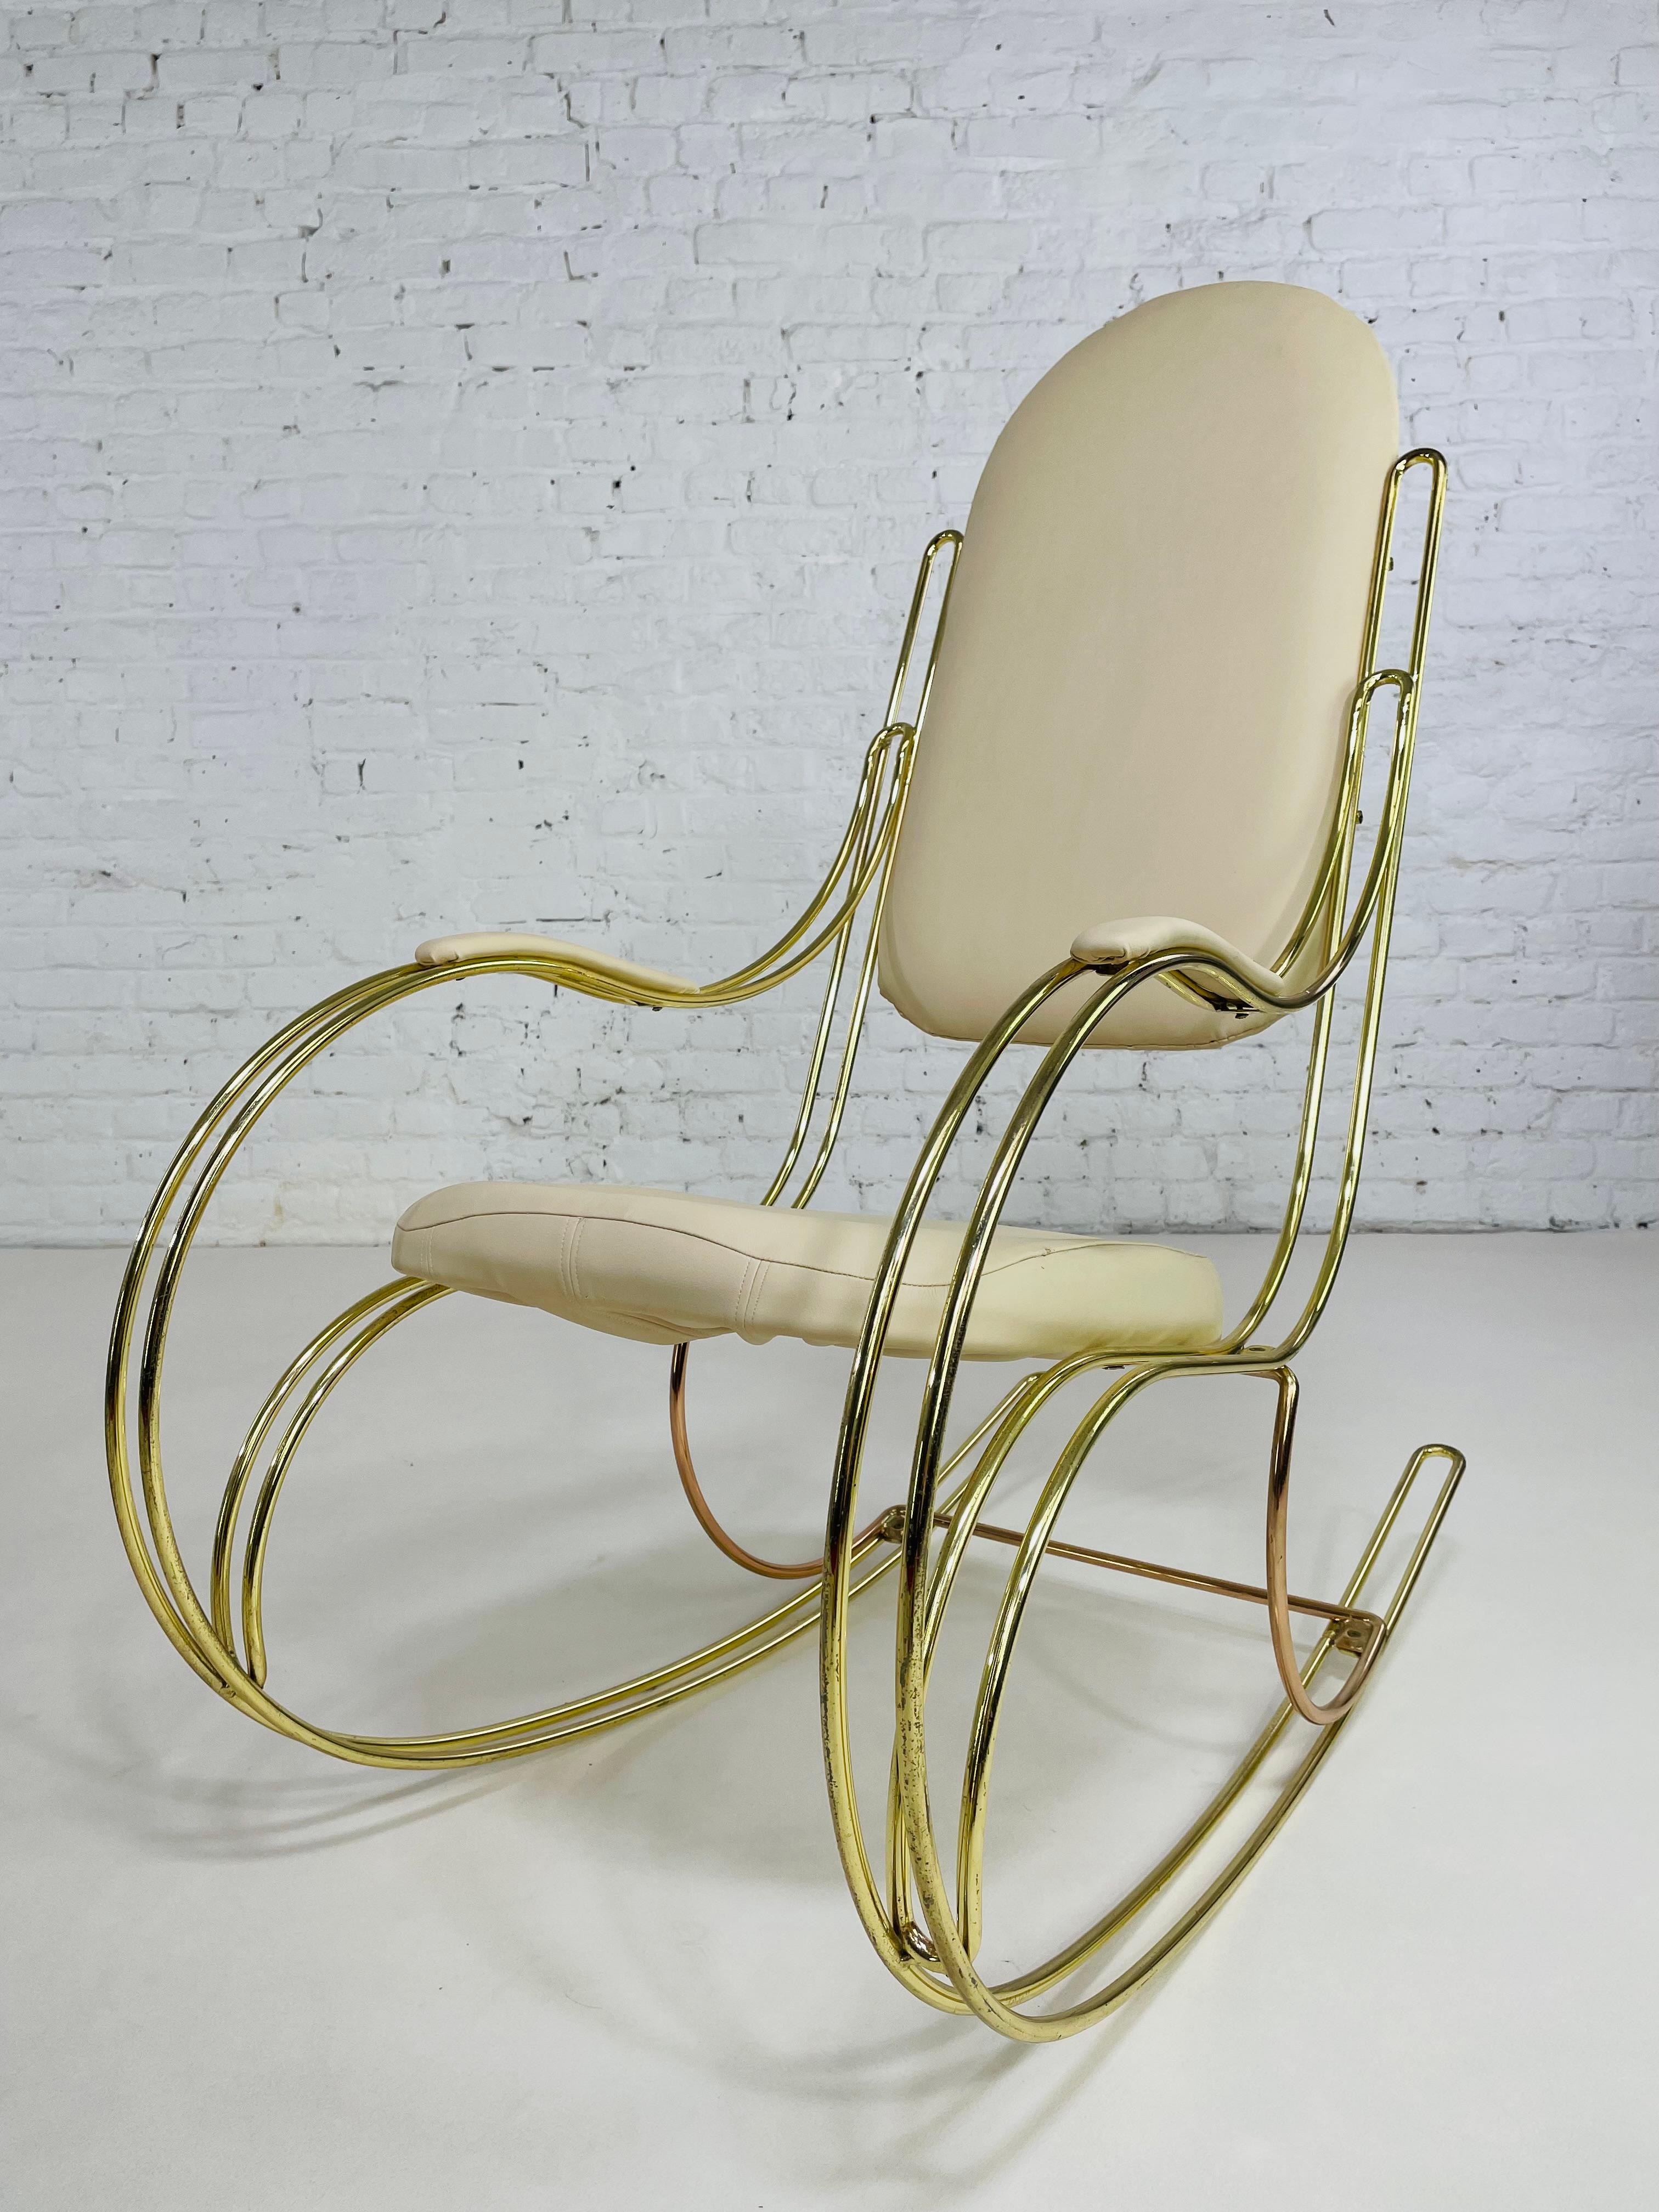 1960s-1970s Brass And Beige Faux Leather Rocking Chair For Sale 8